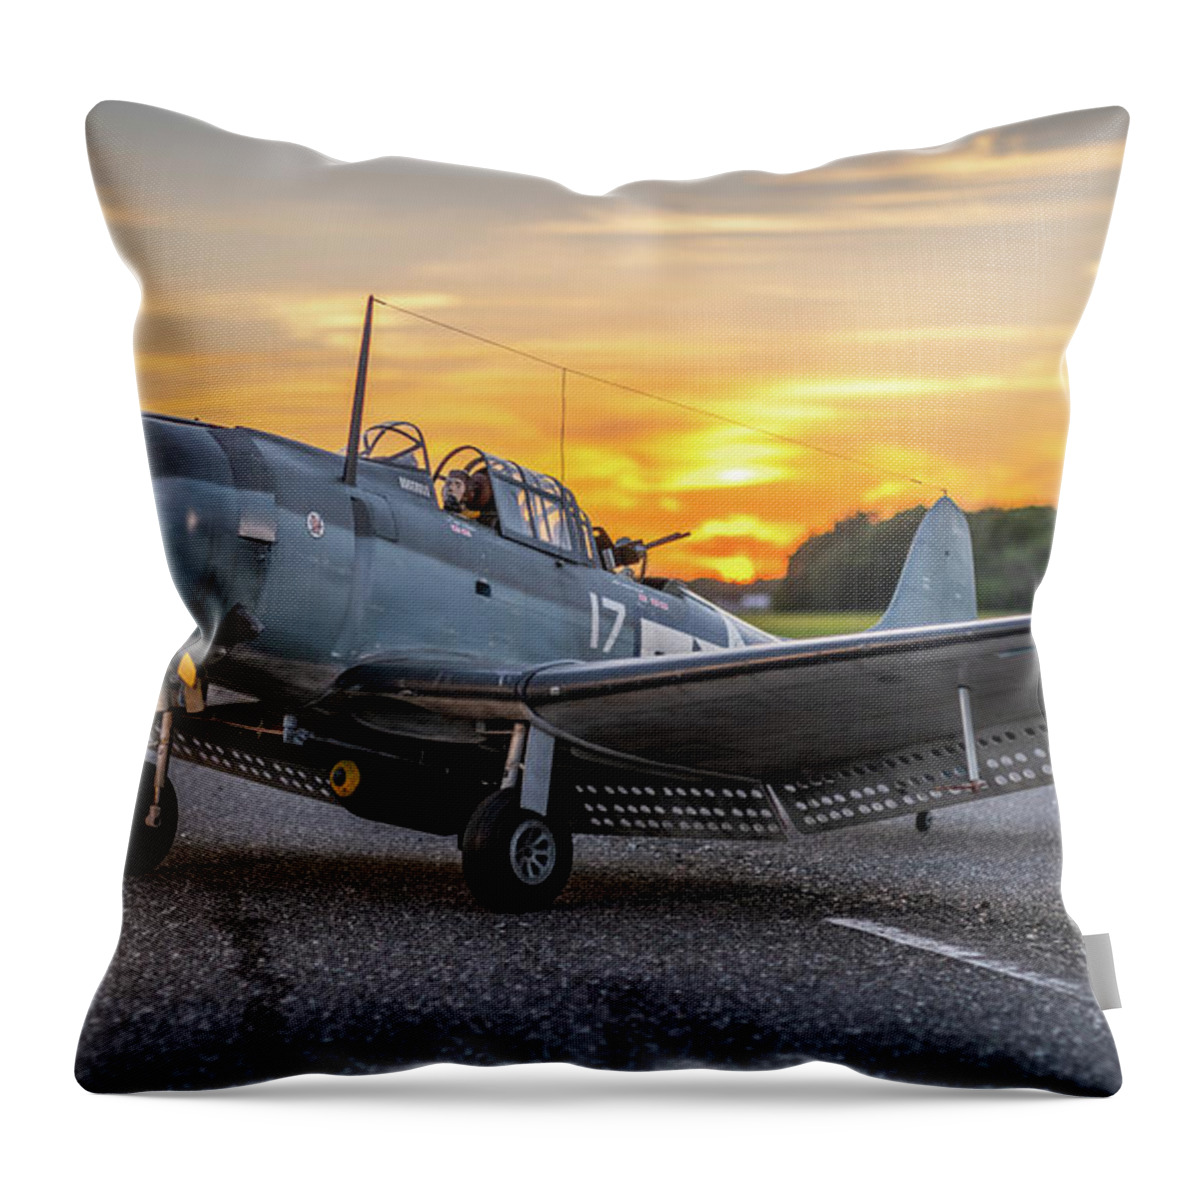  Throw Pillow featuring the photograph Mike 4 by David Hart